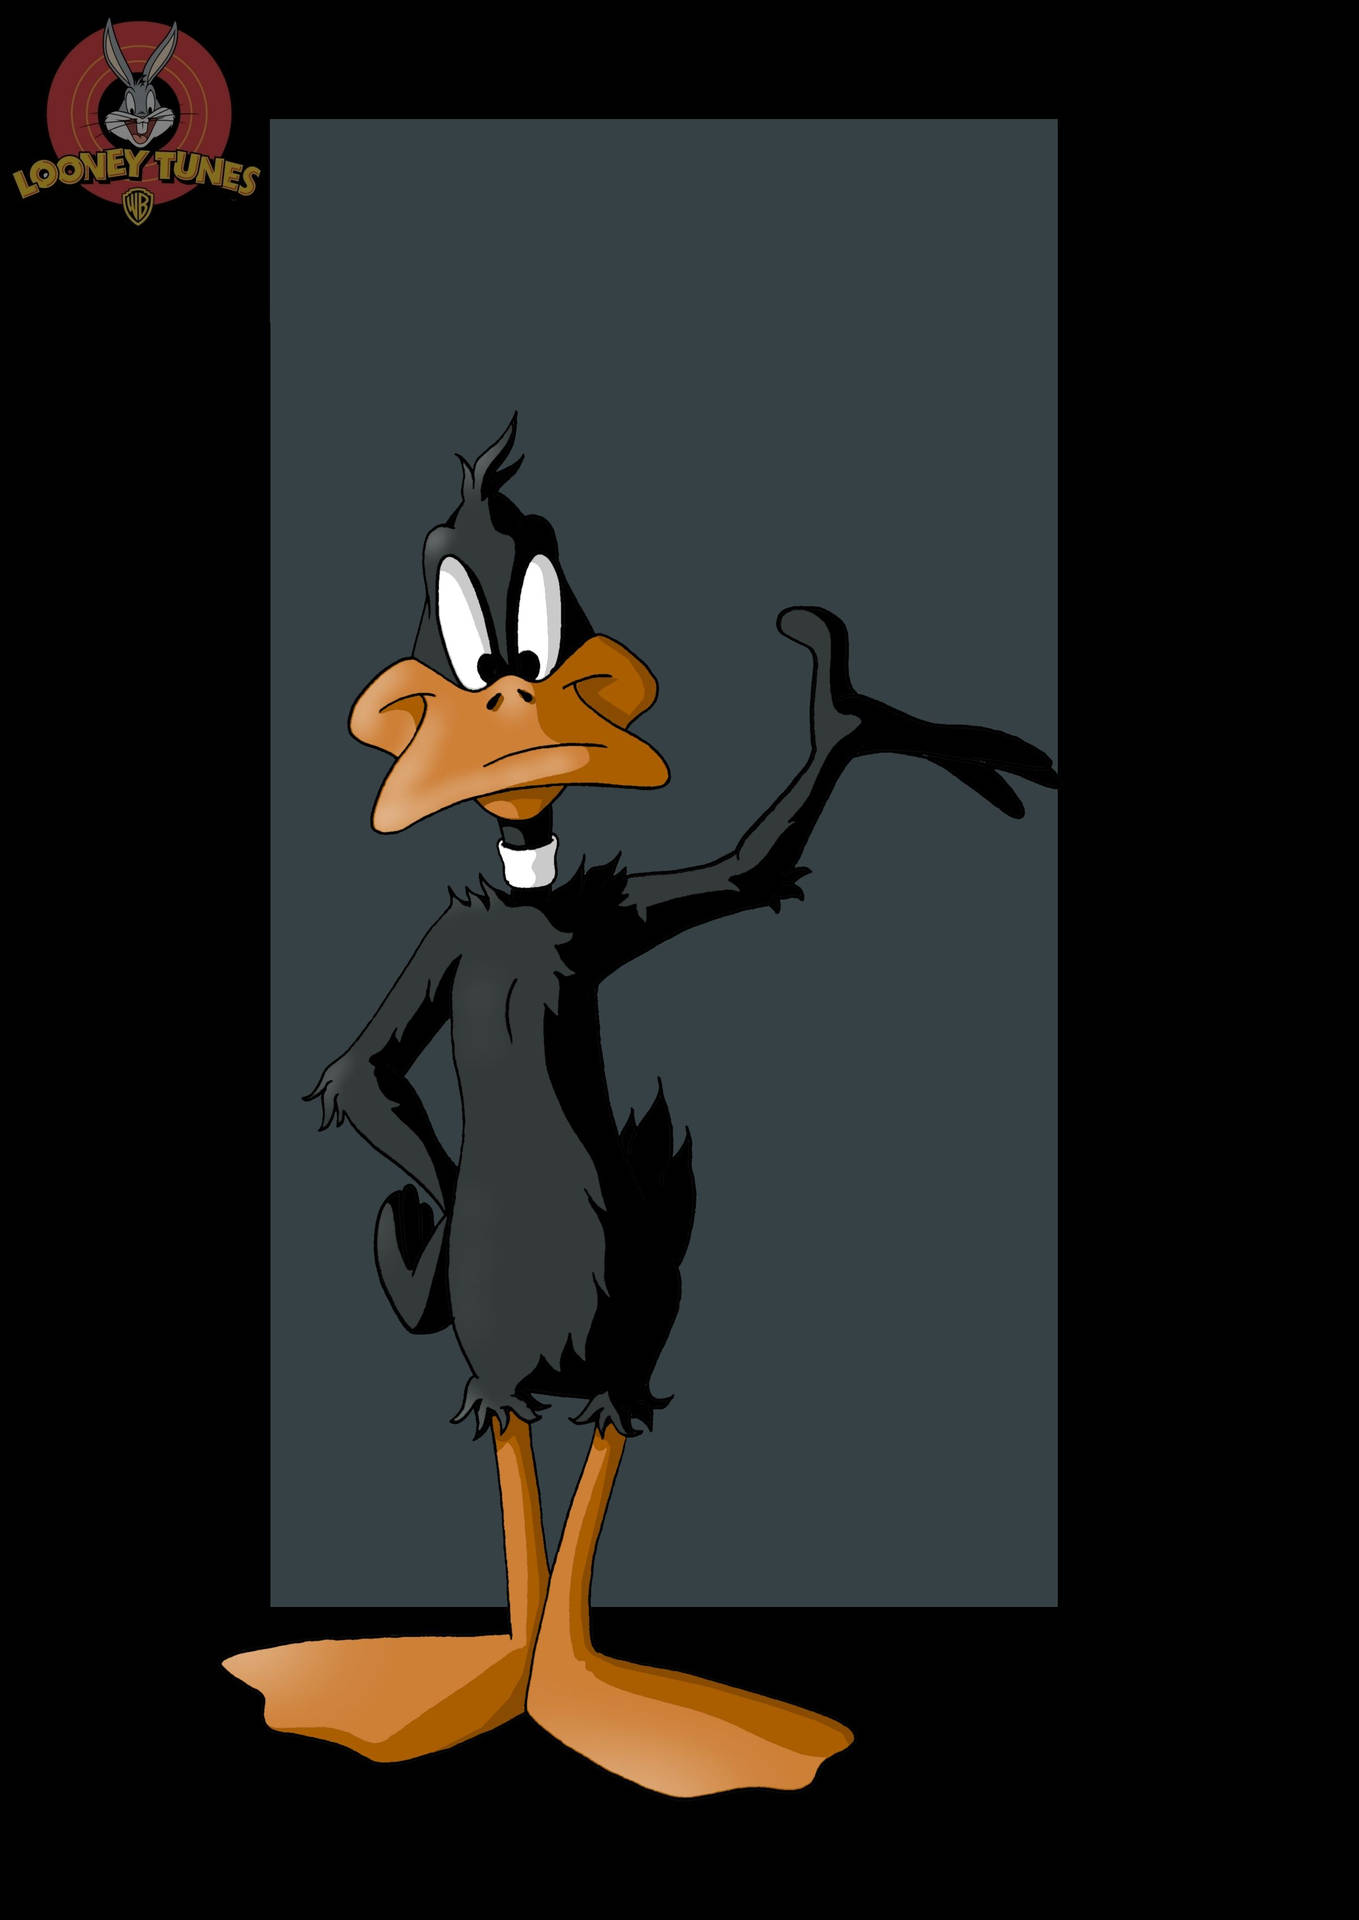 Daffy Duck Digital Graphic Poster Background